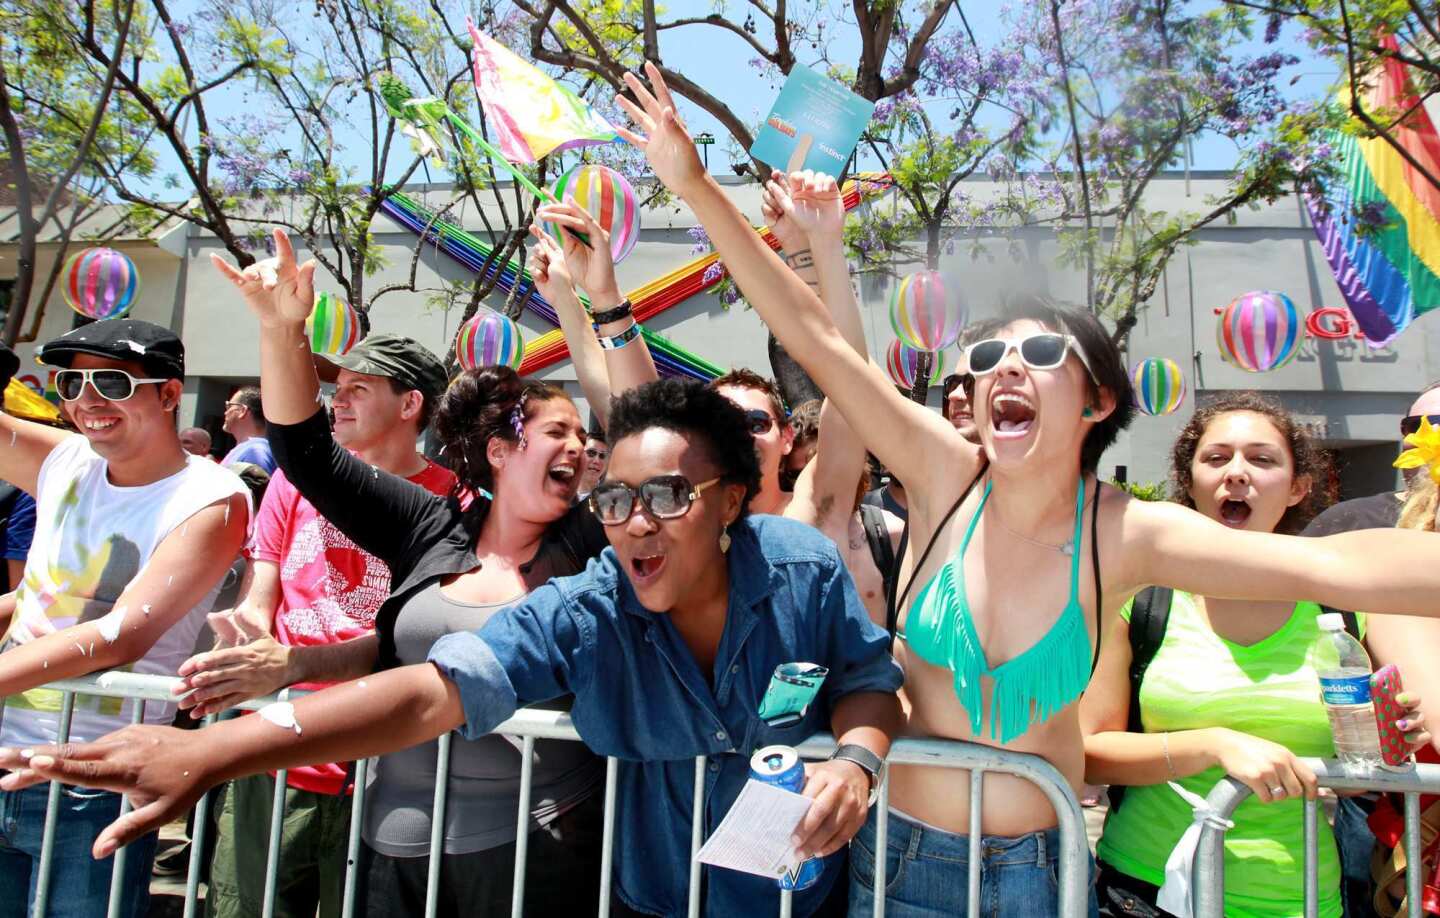 2012 L.A. Pride Parade: Parade goers celebrate gay pride during the L.A. Pride Parade in West Hollywood on Sunday.